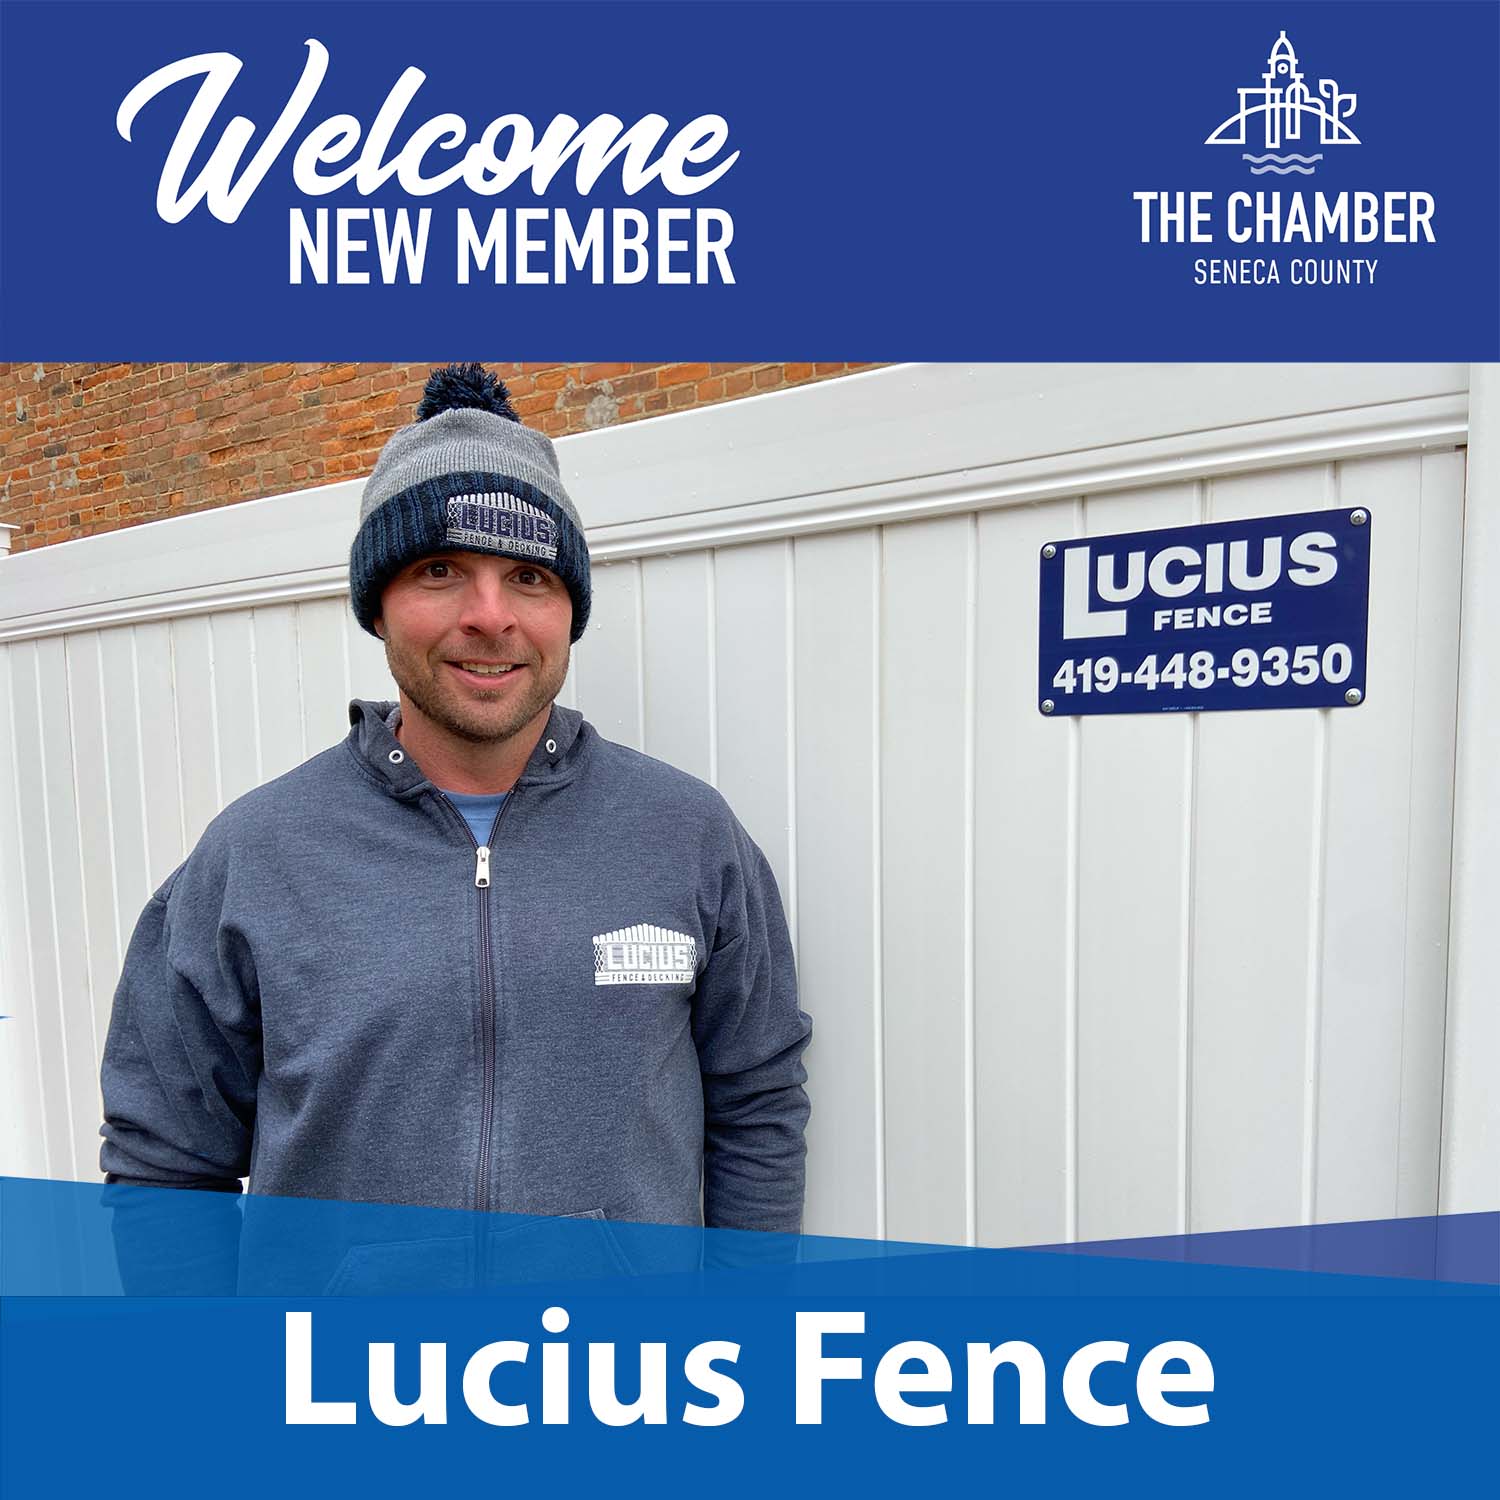 New Member: Lucius Fence